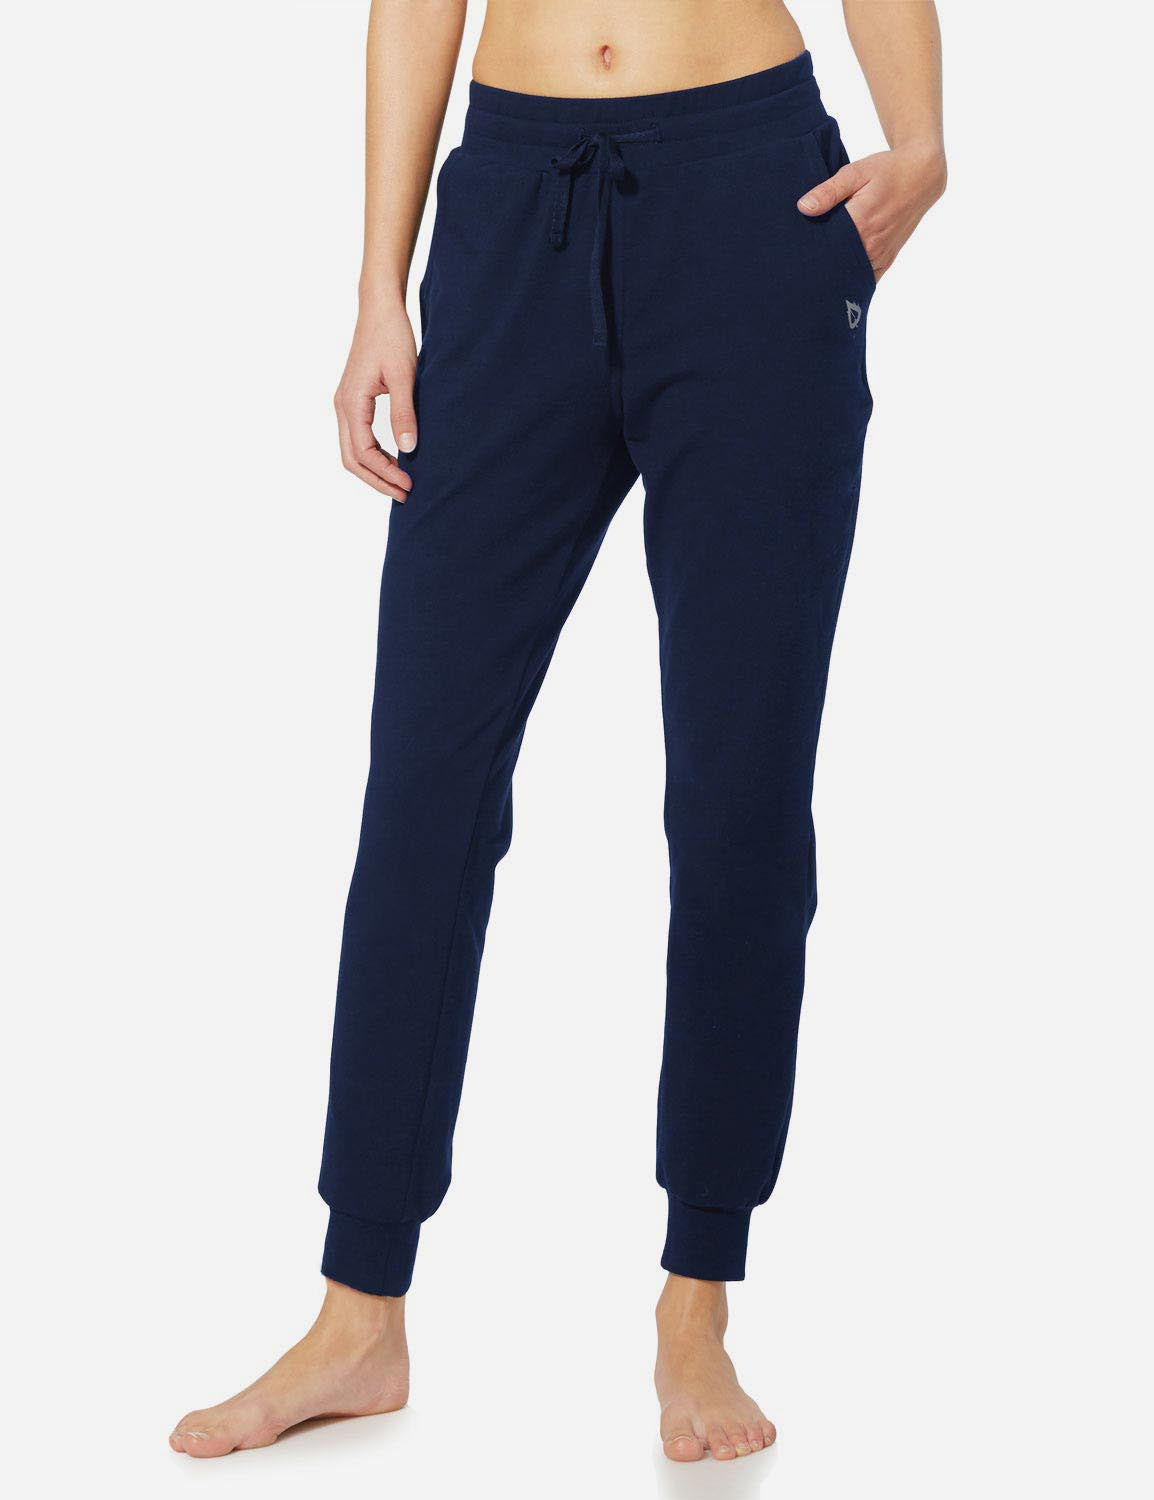 Baleaf Women's Cotton Comfy Pocketed & Tapered Weekend Joggers abh103 Navy Blue Side